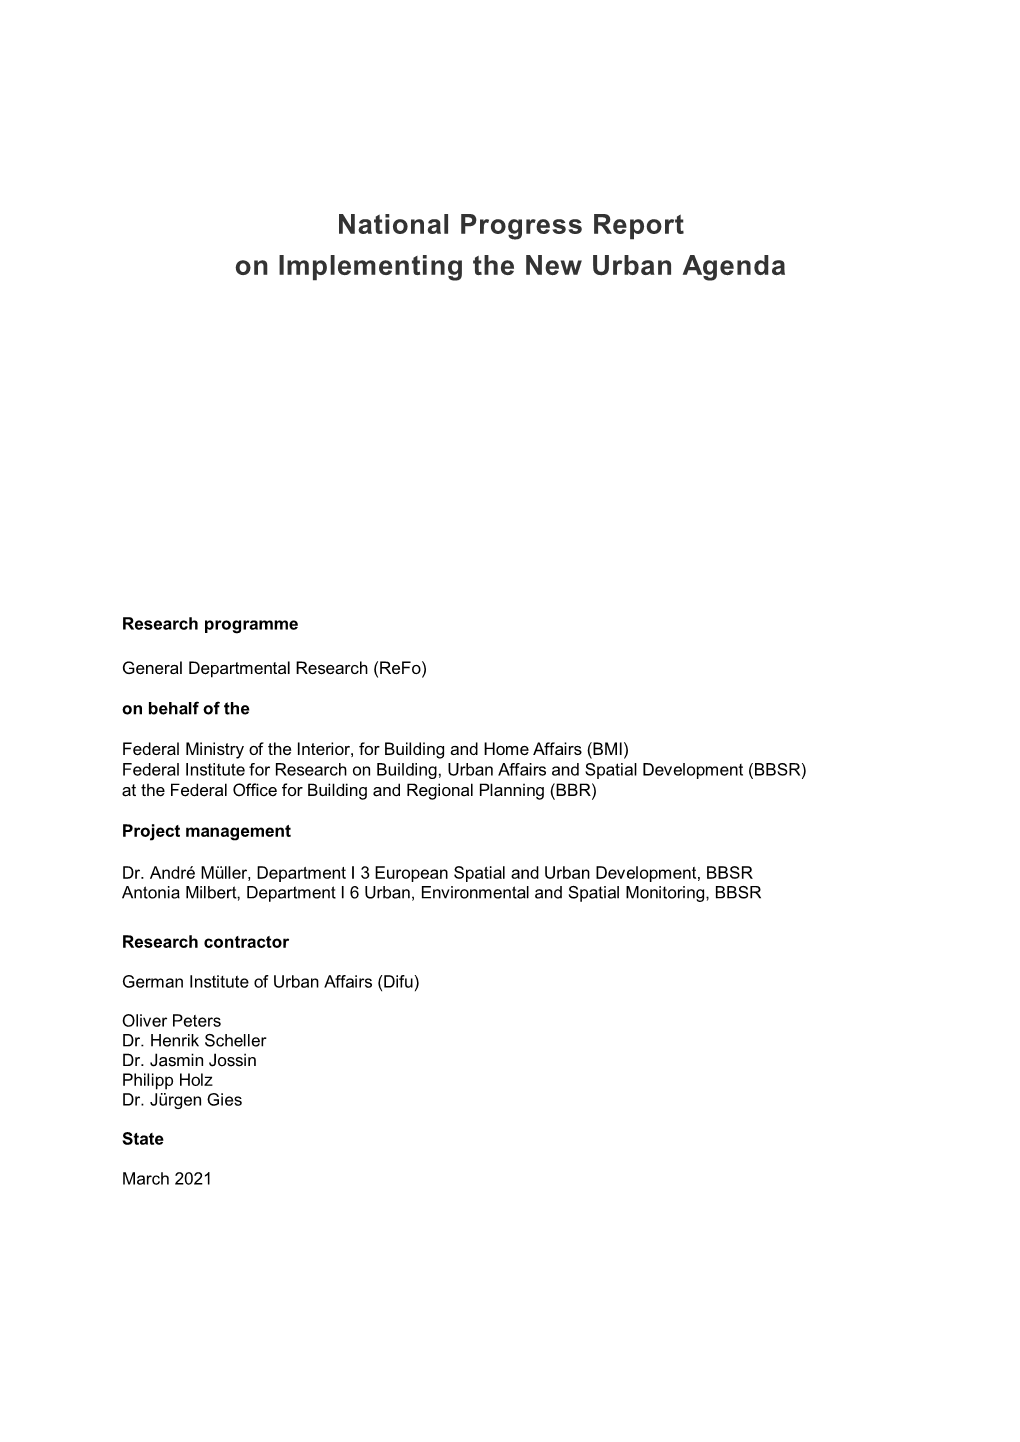 National Progress Report on Implementing the New Urban Agenda